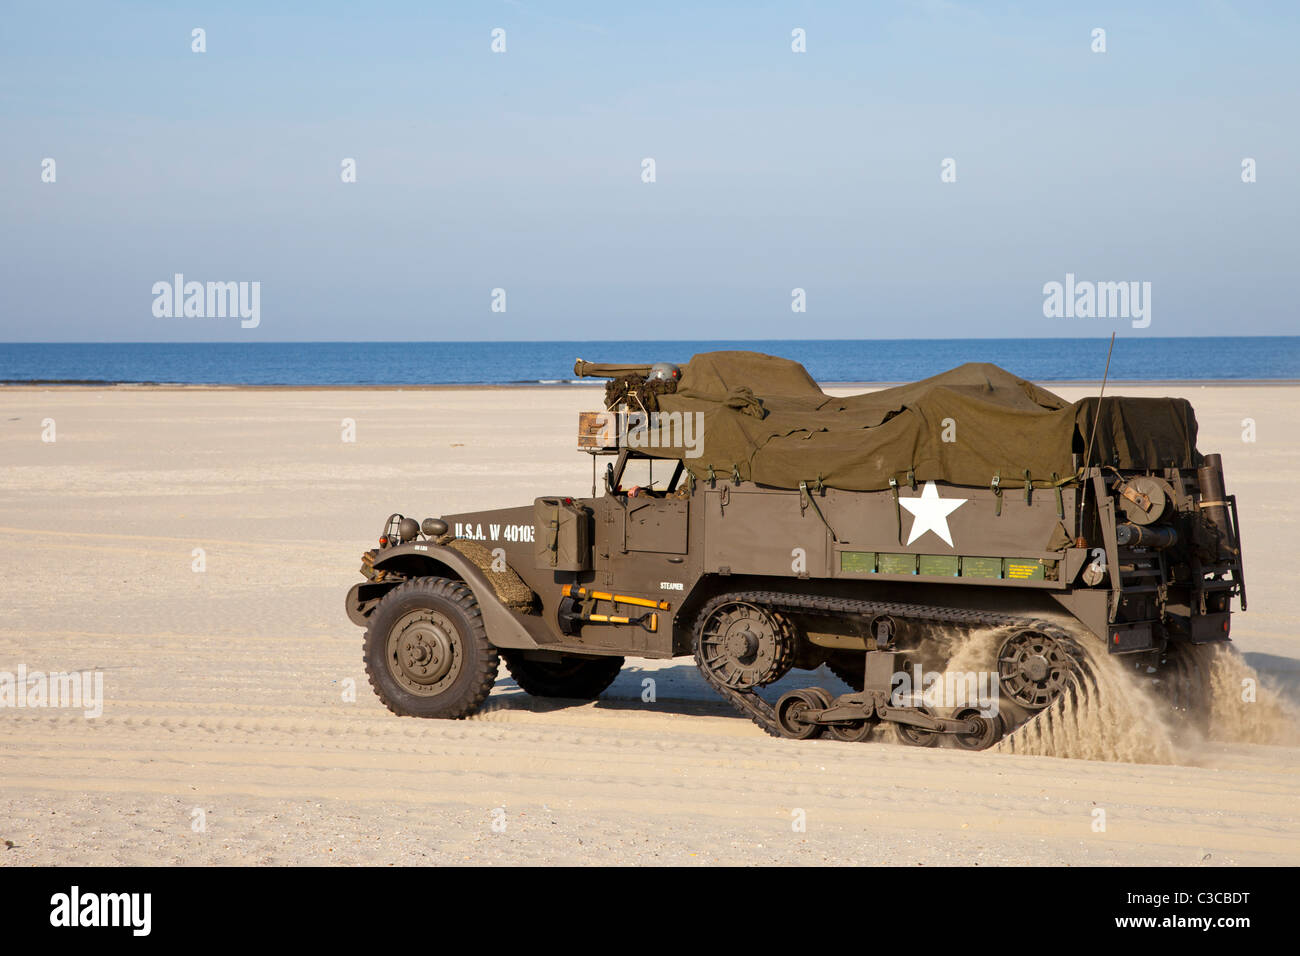 US Army halftrack on beach Banque D'Images